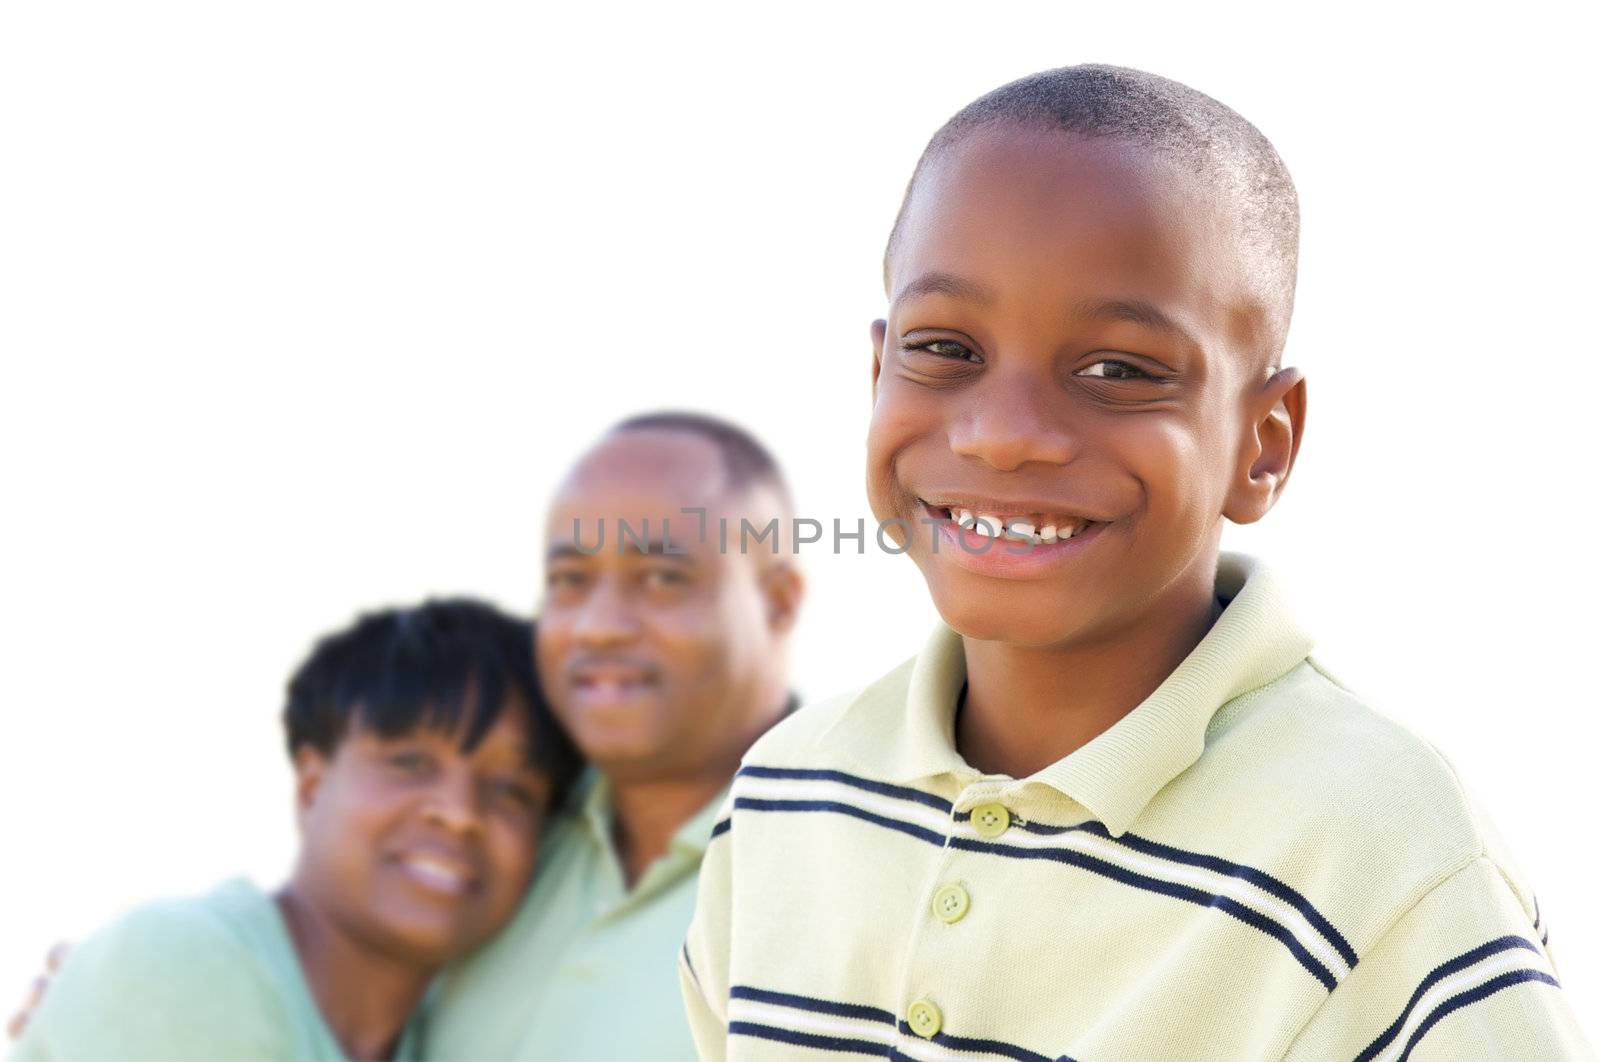 Handsome African American Boy with Parents Isolated on a White Background.